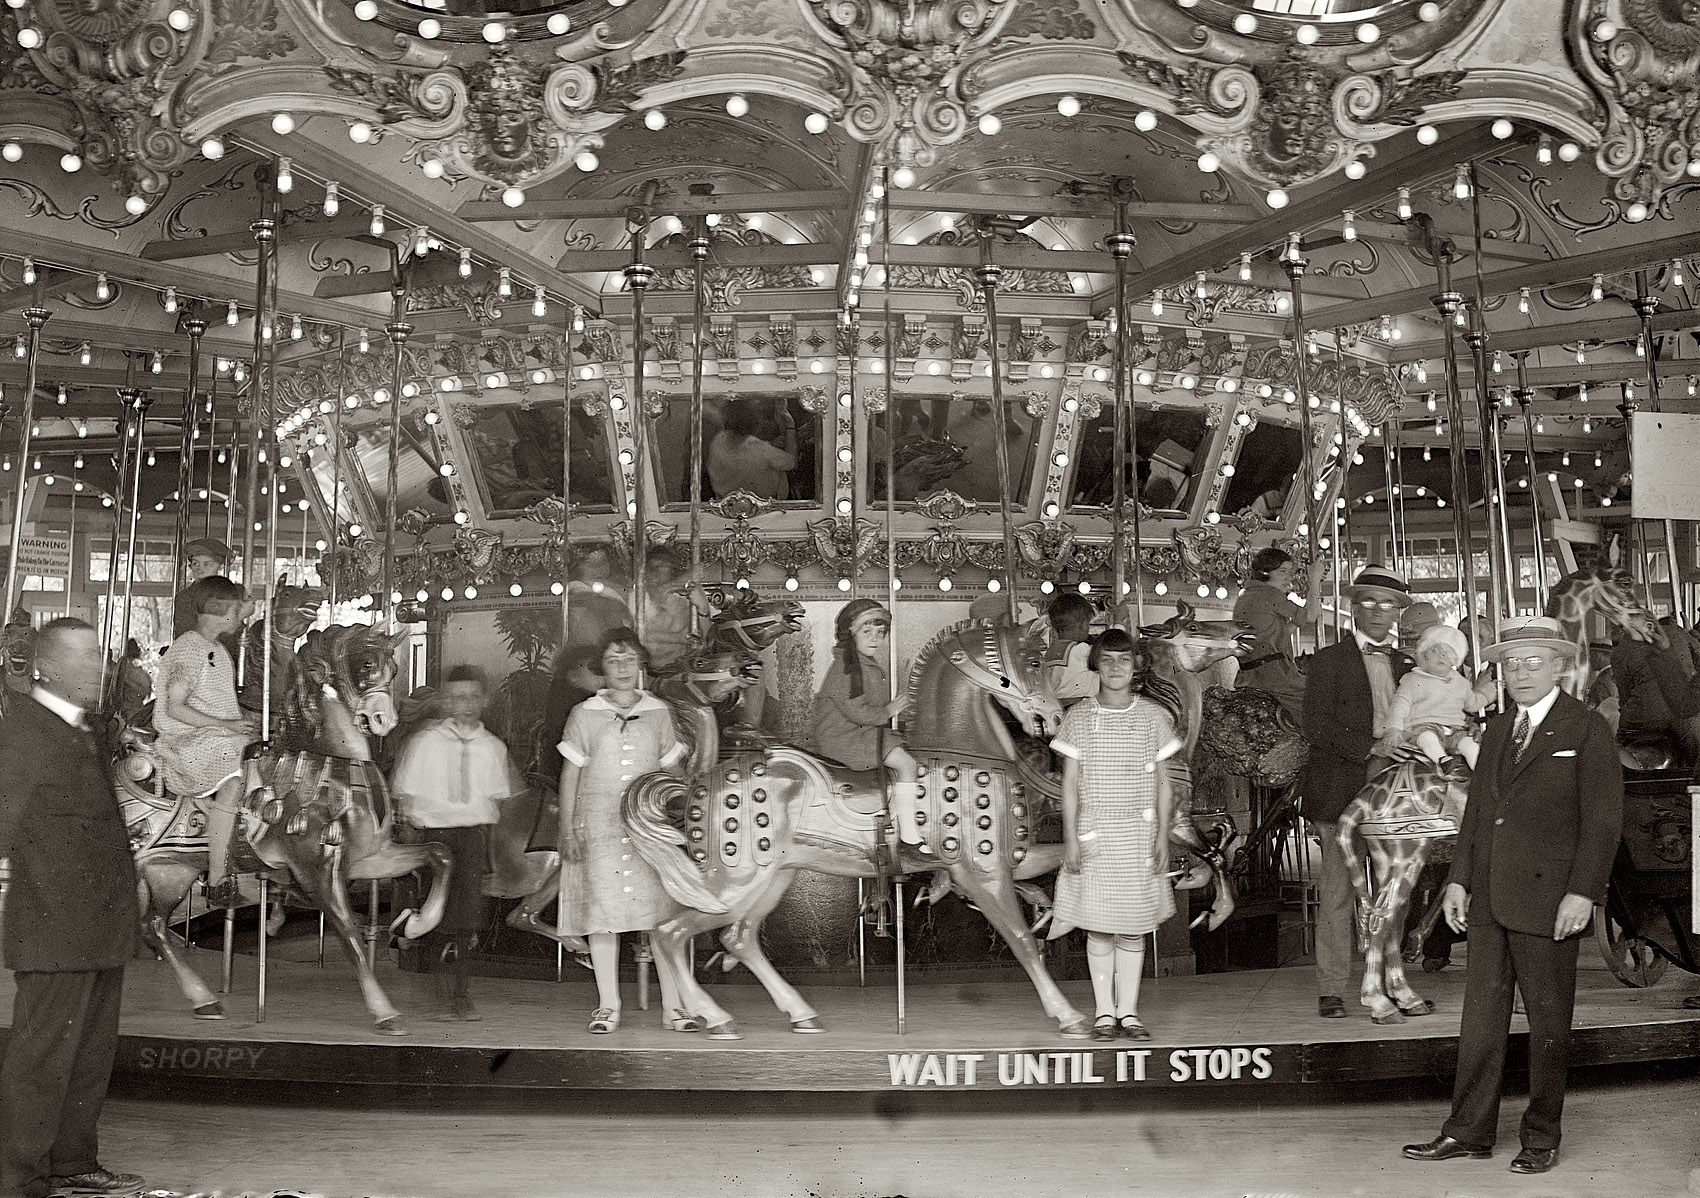 "Glen Echo Park Co., 1925." The Dentzel Carousel at the Glen Echo amusement park in Montgomery County, Maryland. National Photo Company glass negative. View full size.